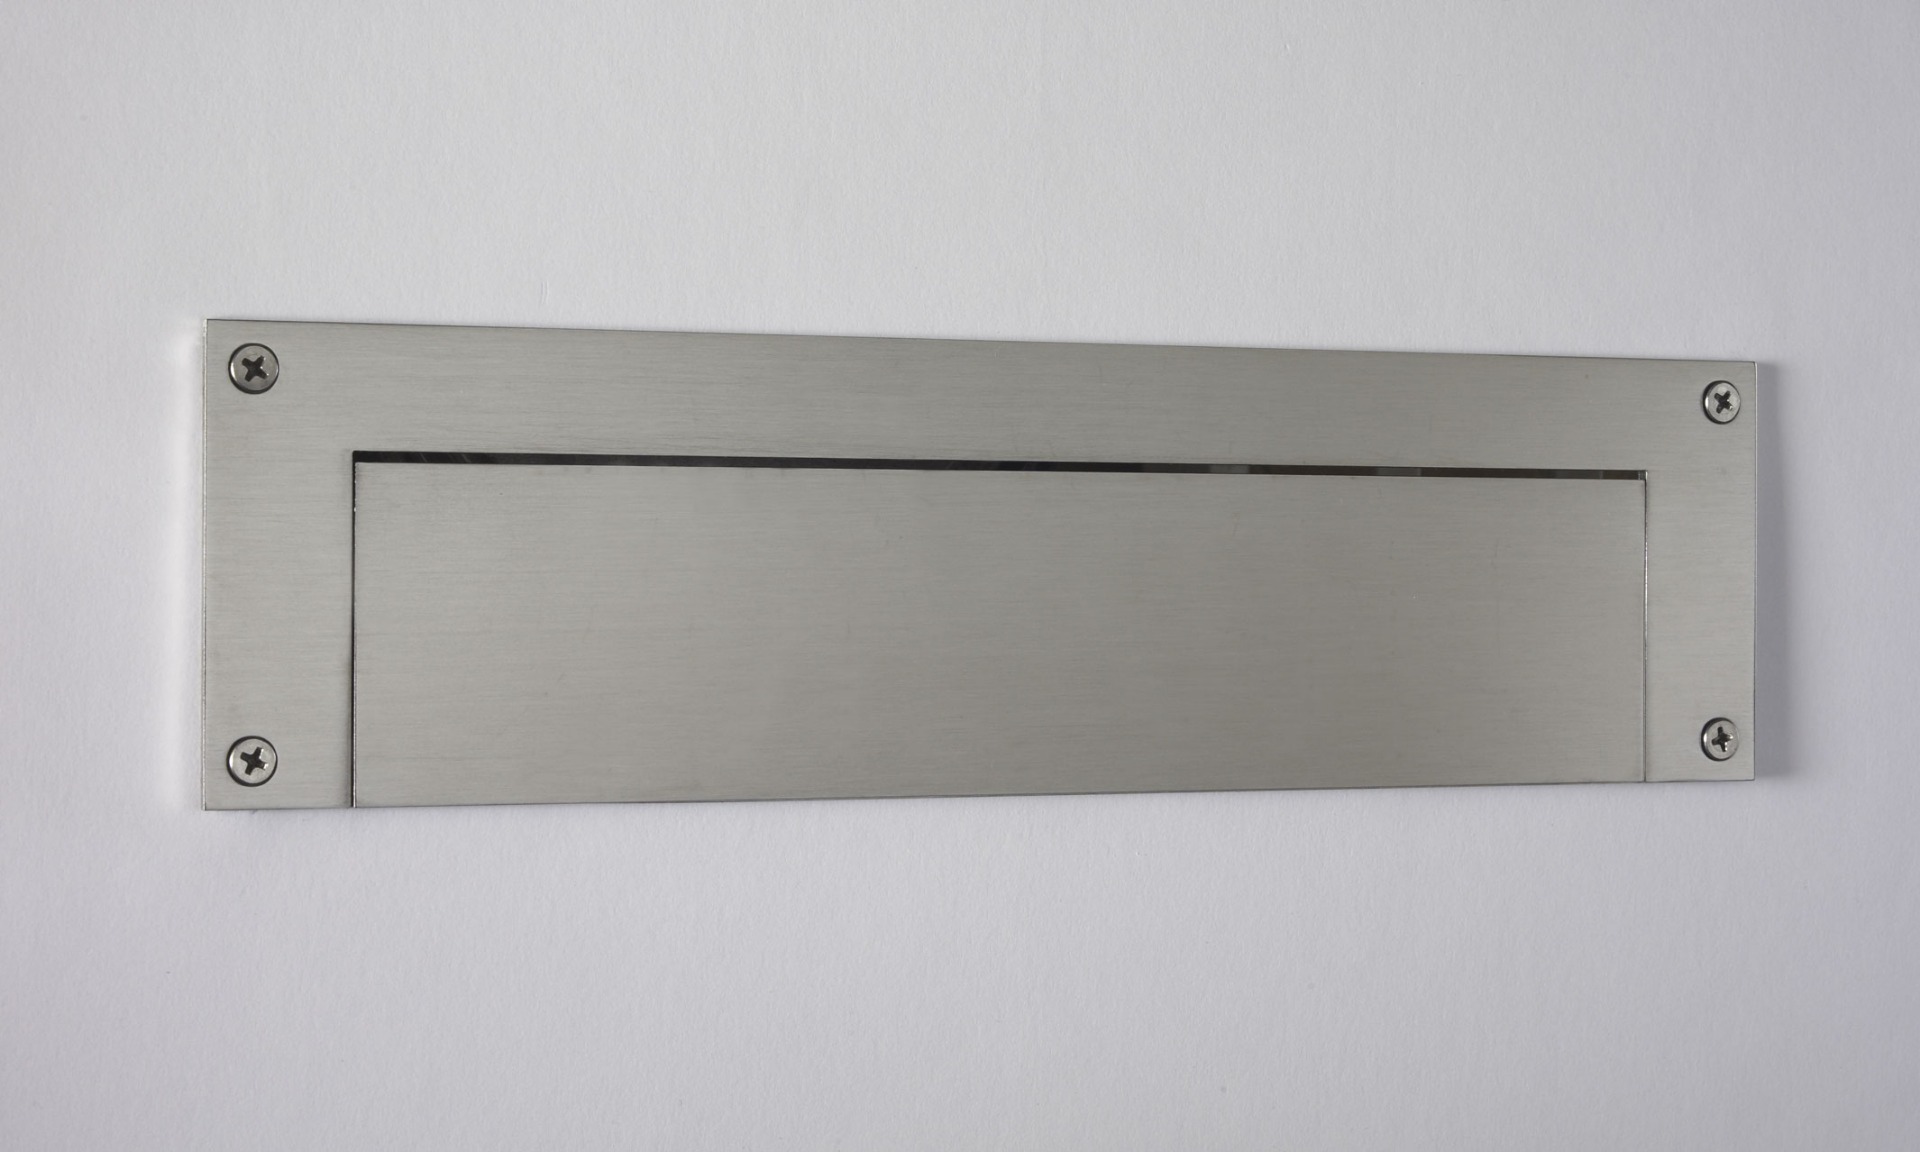 Stainless Steel Mail Slot - SMALL (15.7 in. x 3.9 in.) - Rear Piece Only (Choose Finish)